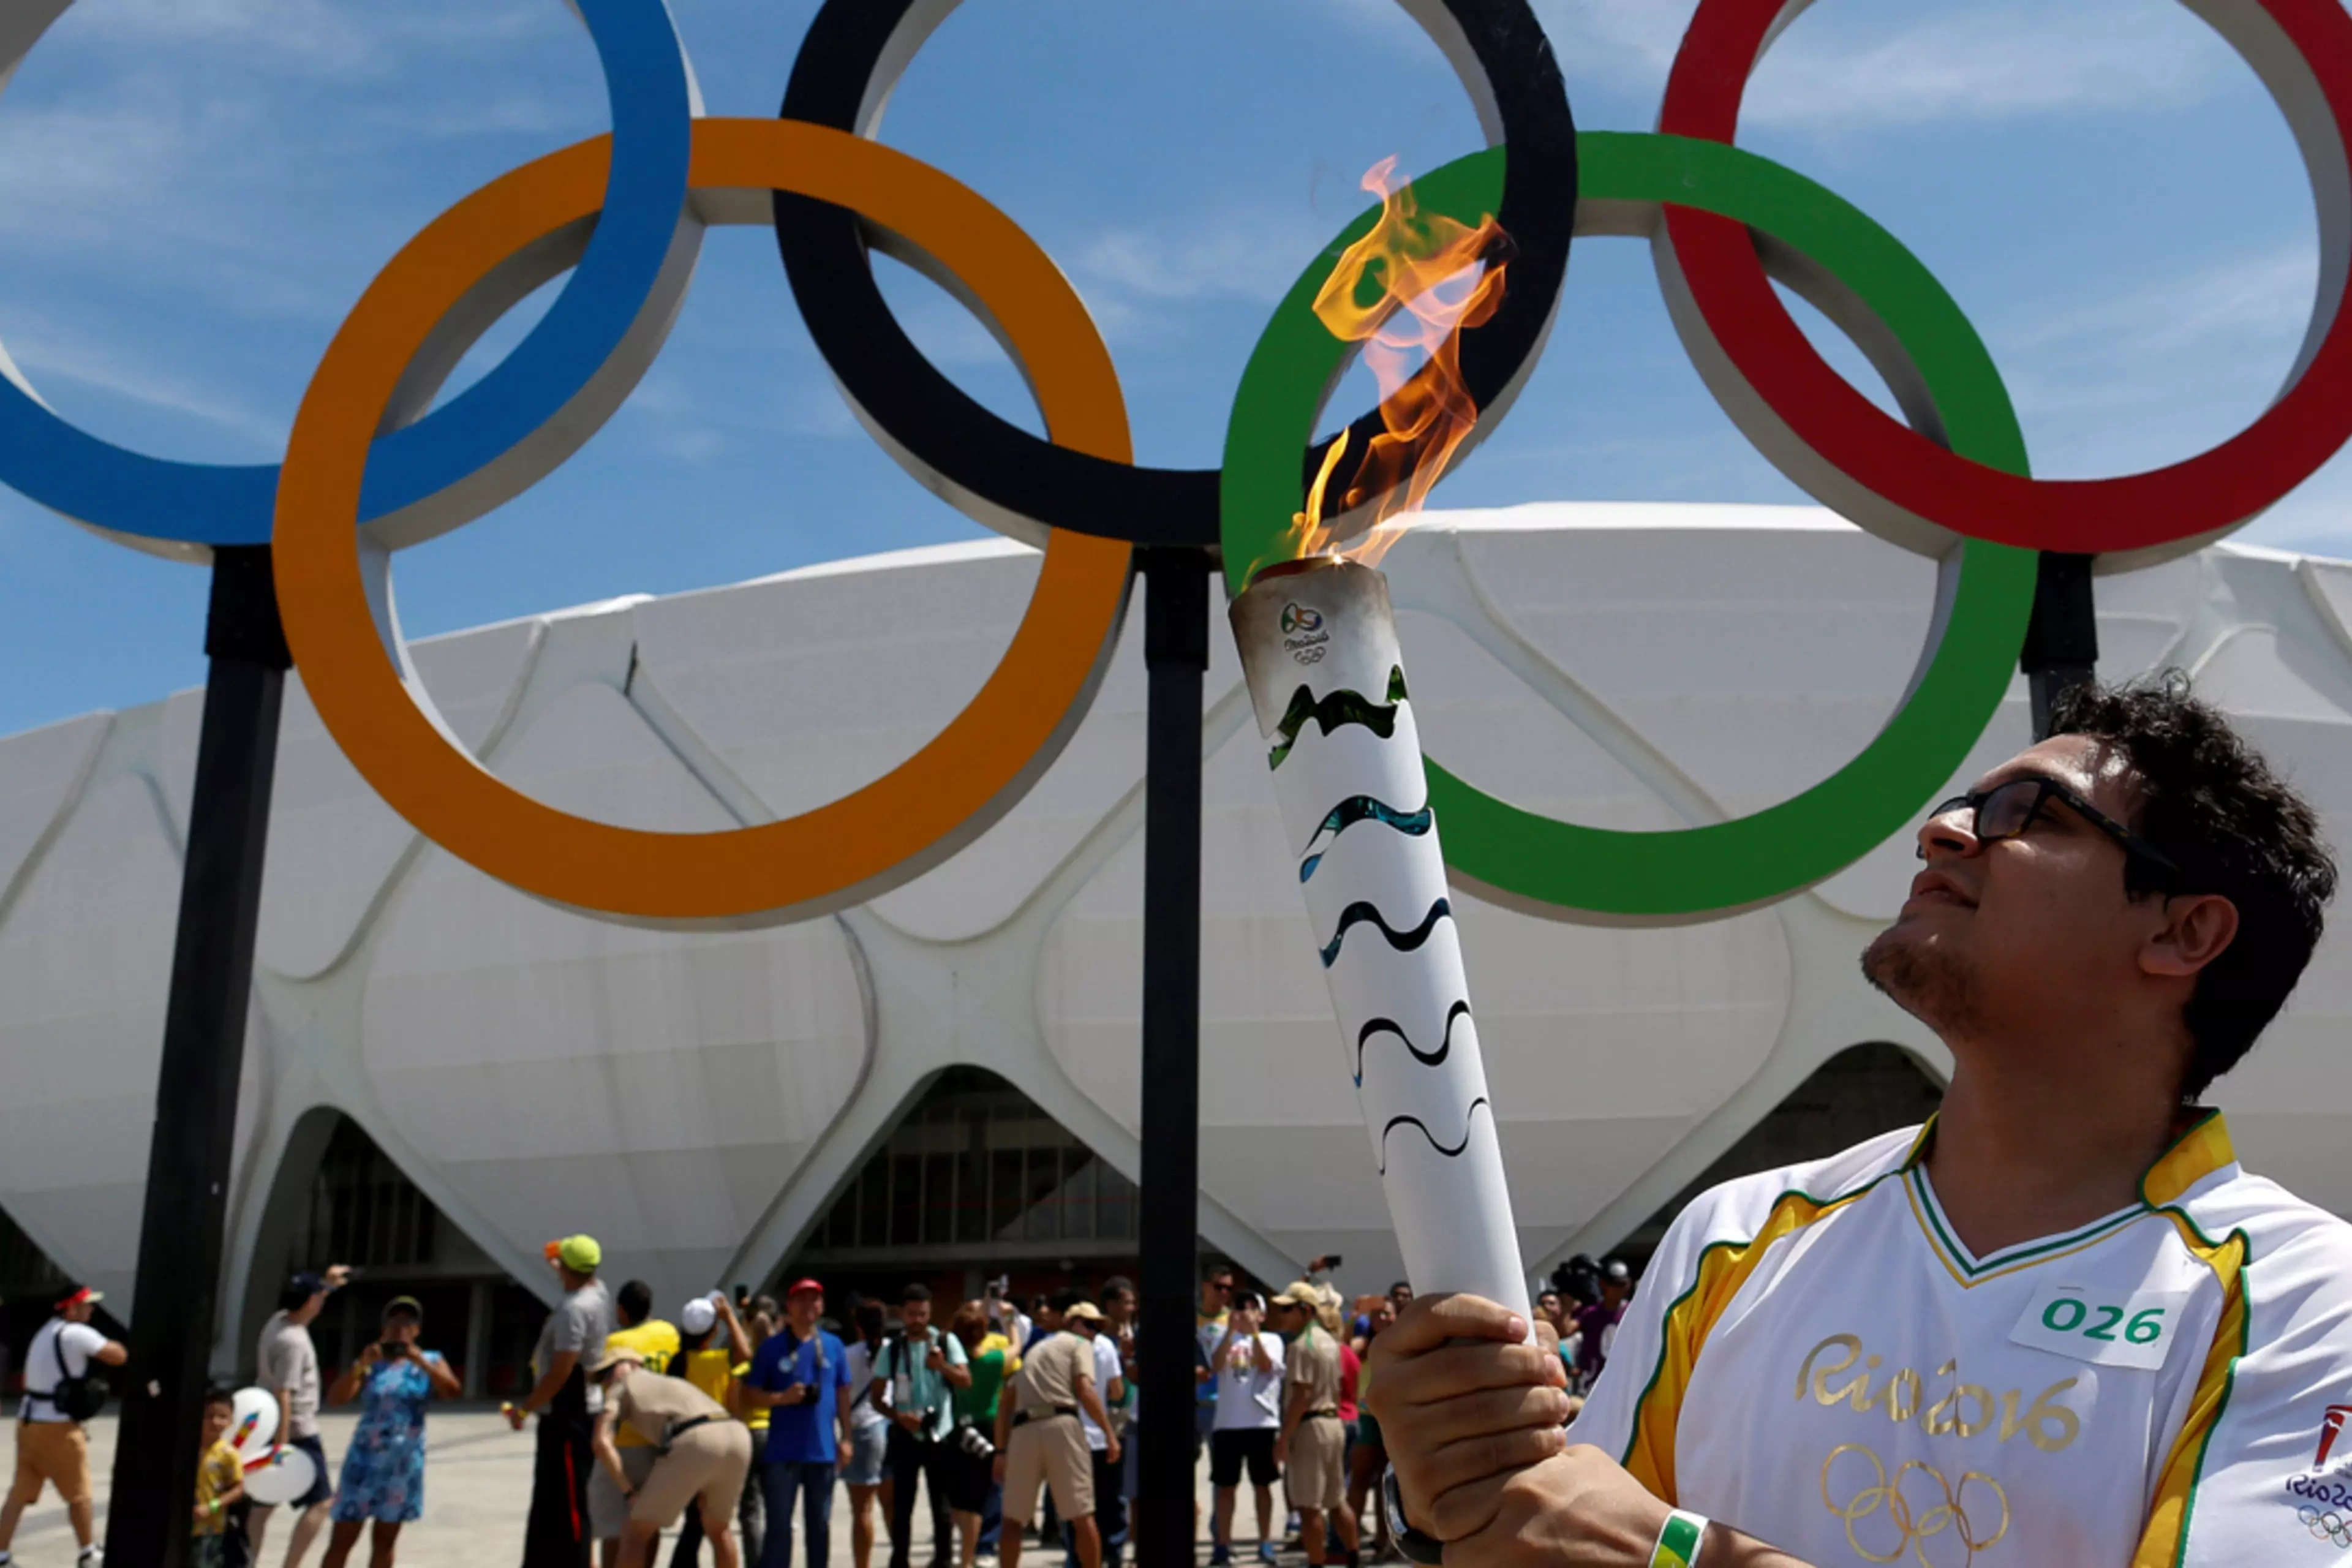 Designer Glauber Penha takes part in the Olympic Flame torch relay outside a stadium in Manaus, Brazil.